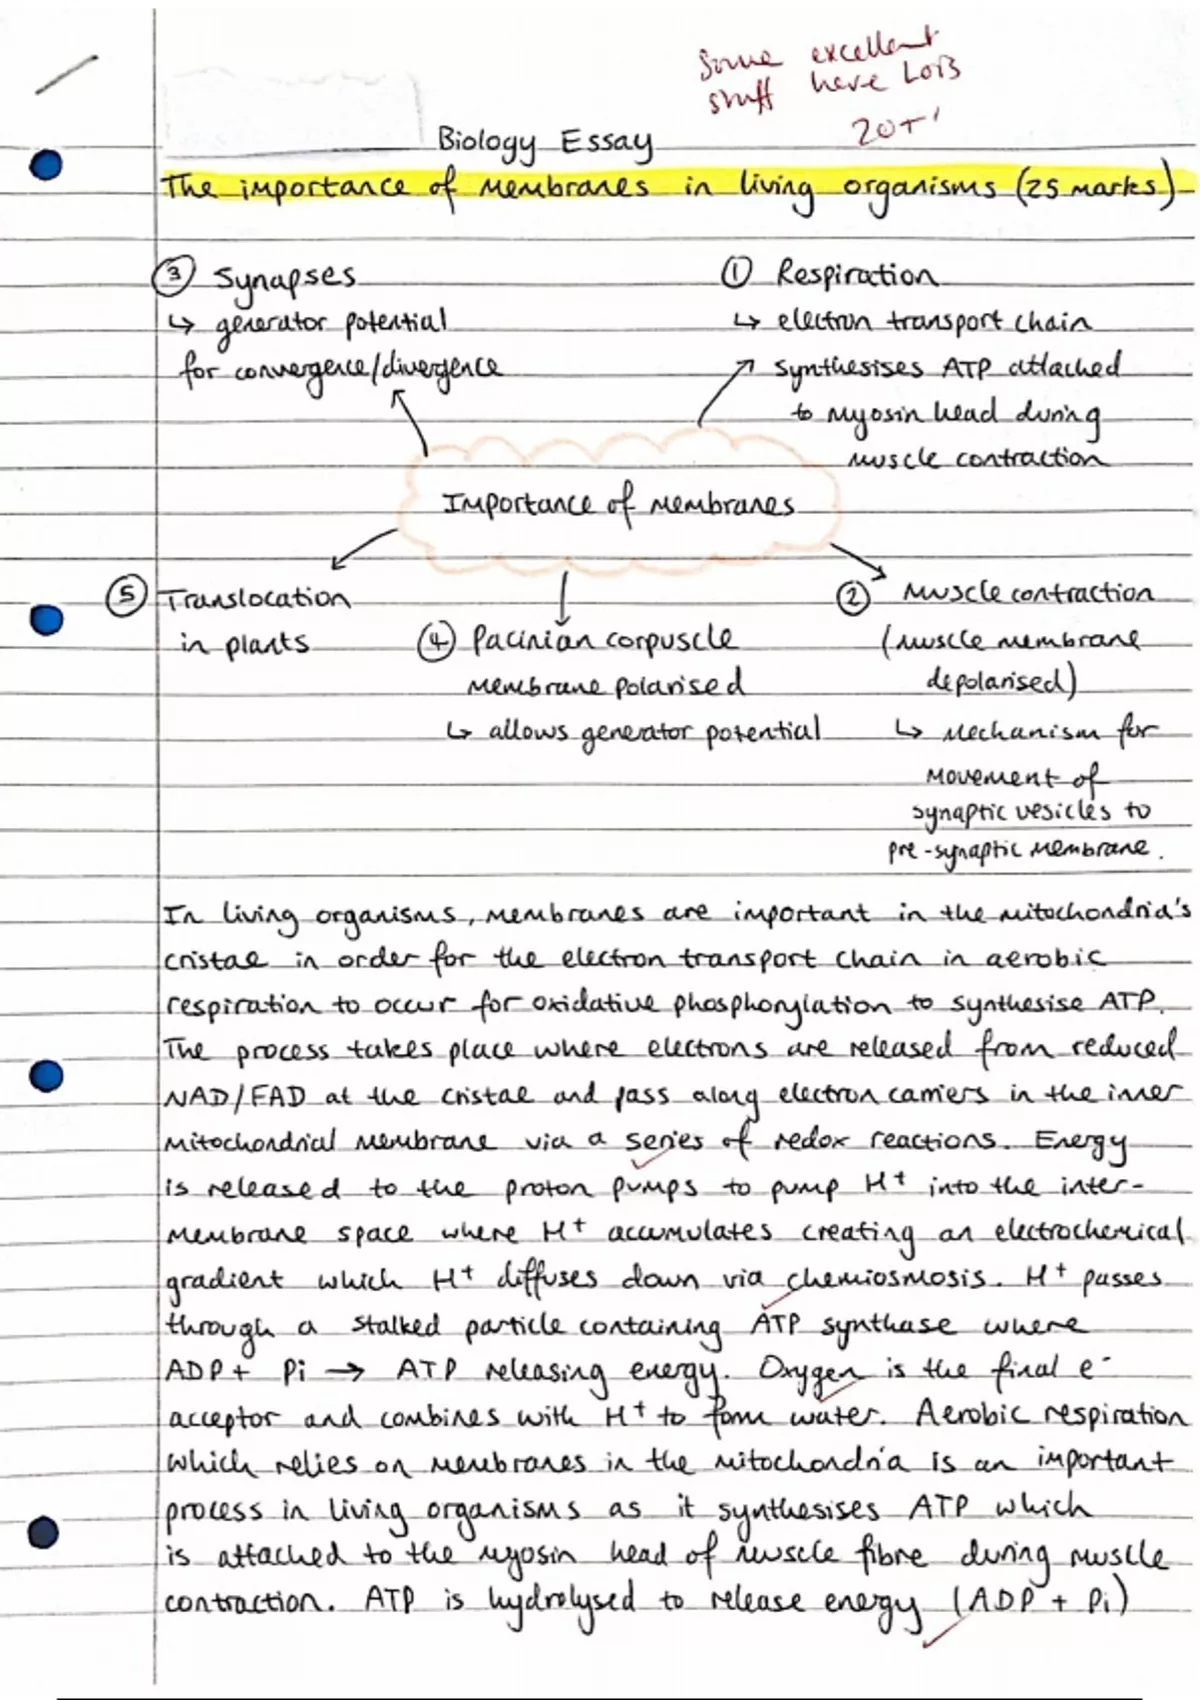 importance of membranes aqa a level biology essay